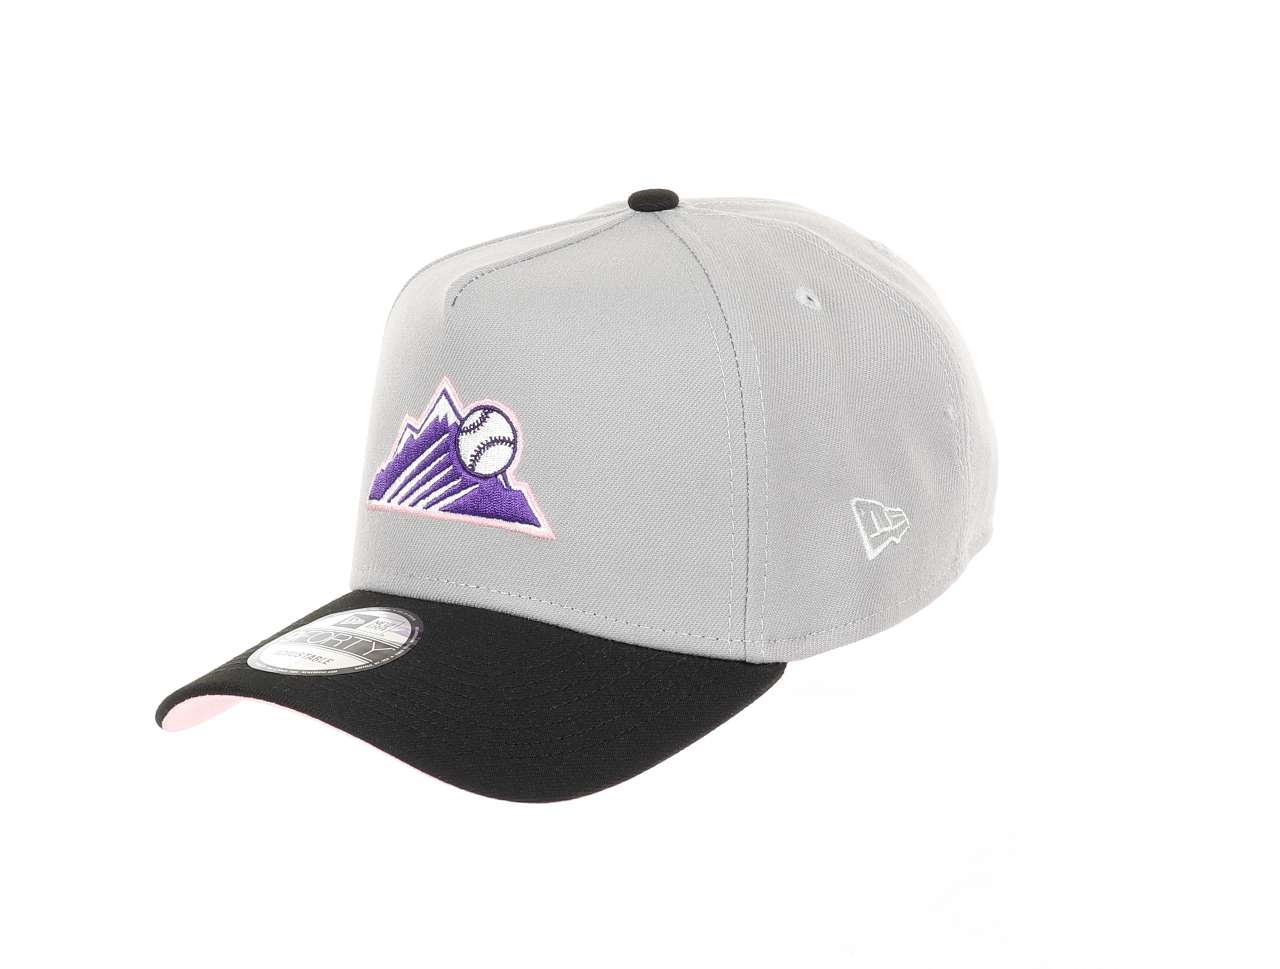 Colorado Rockies MLB Cooperstown All-Star Game 2021 Sidepatch Gray Black 9Forty A-Frame Adjustable Cap New Era